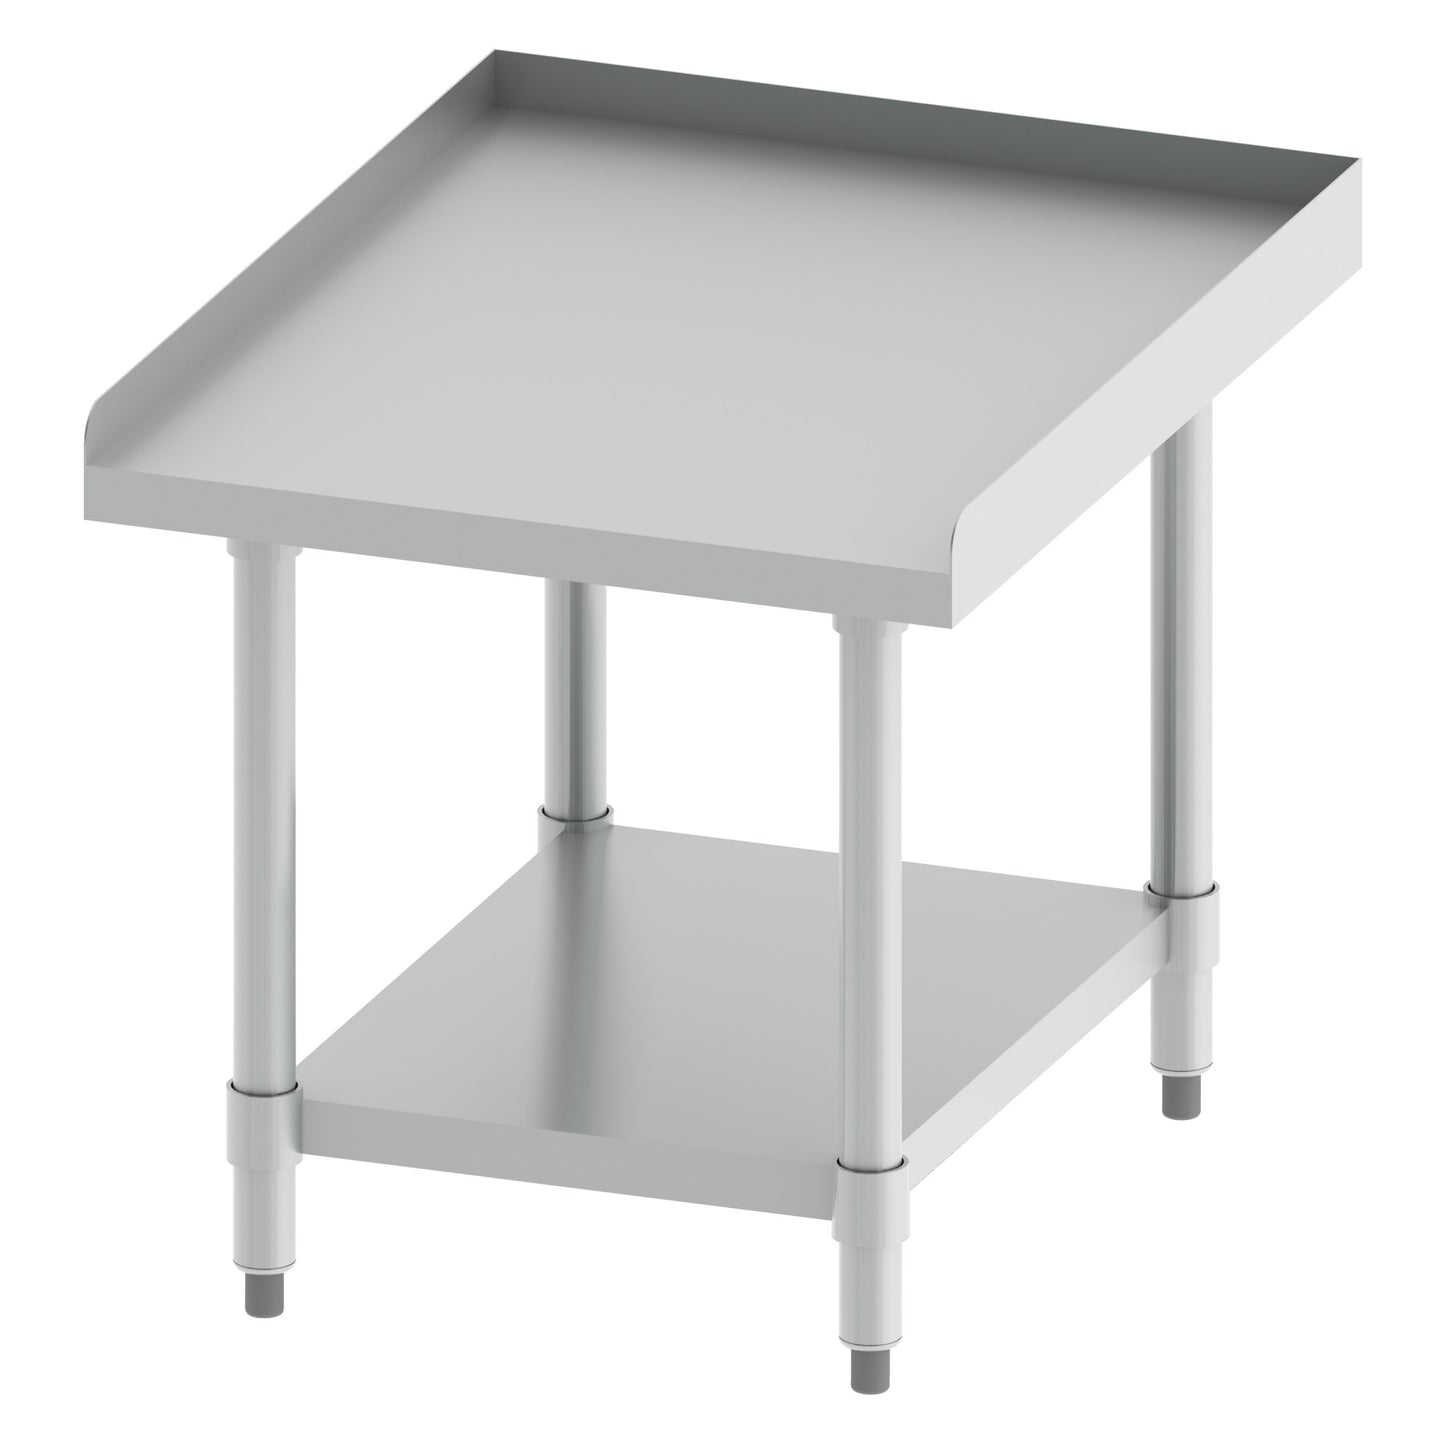 ES-2430 - Stainless Steel Equipment Stand - 24" x 30" x 24"